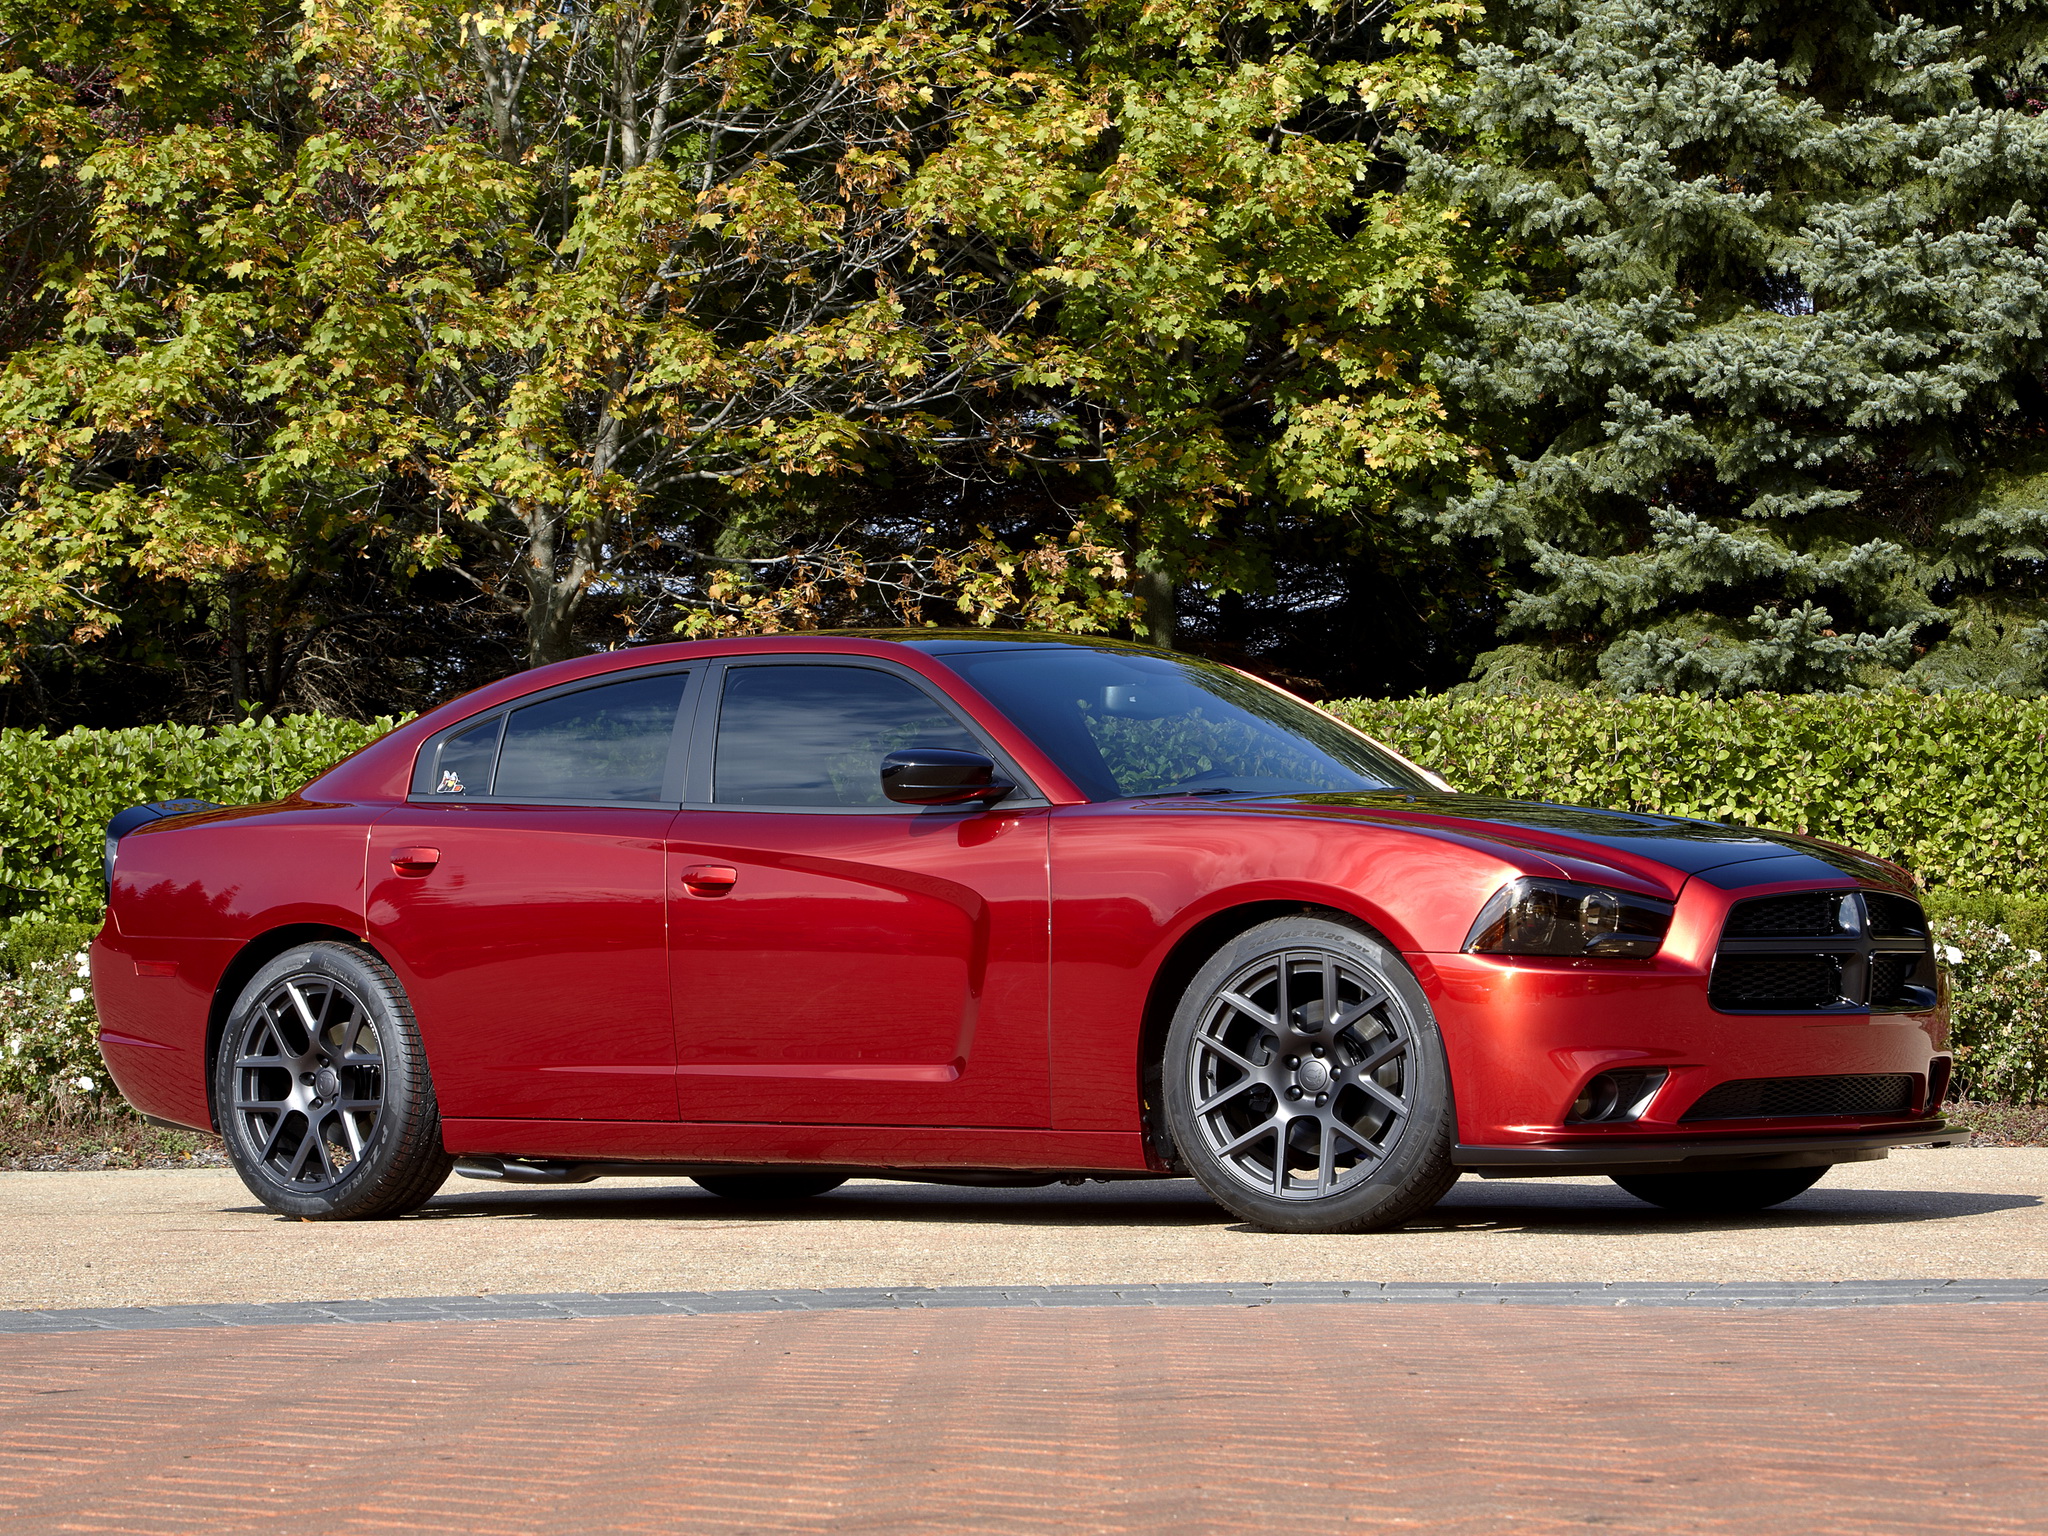 2014, Dodge, Charger, R t, Scat package 3, Muscle, Tuning Wallpaper